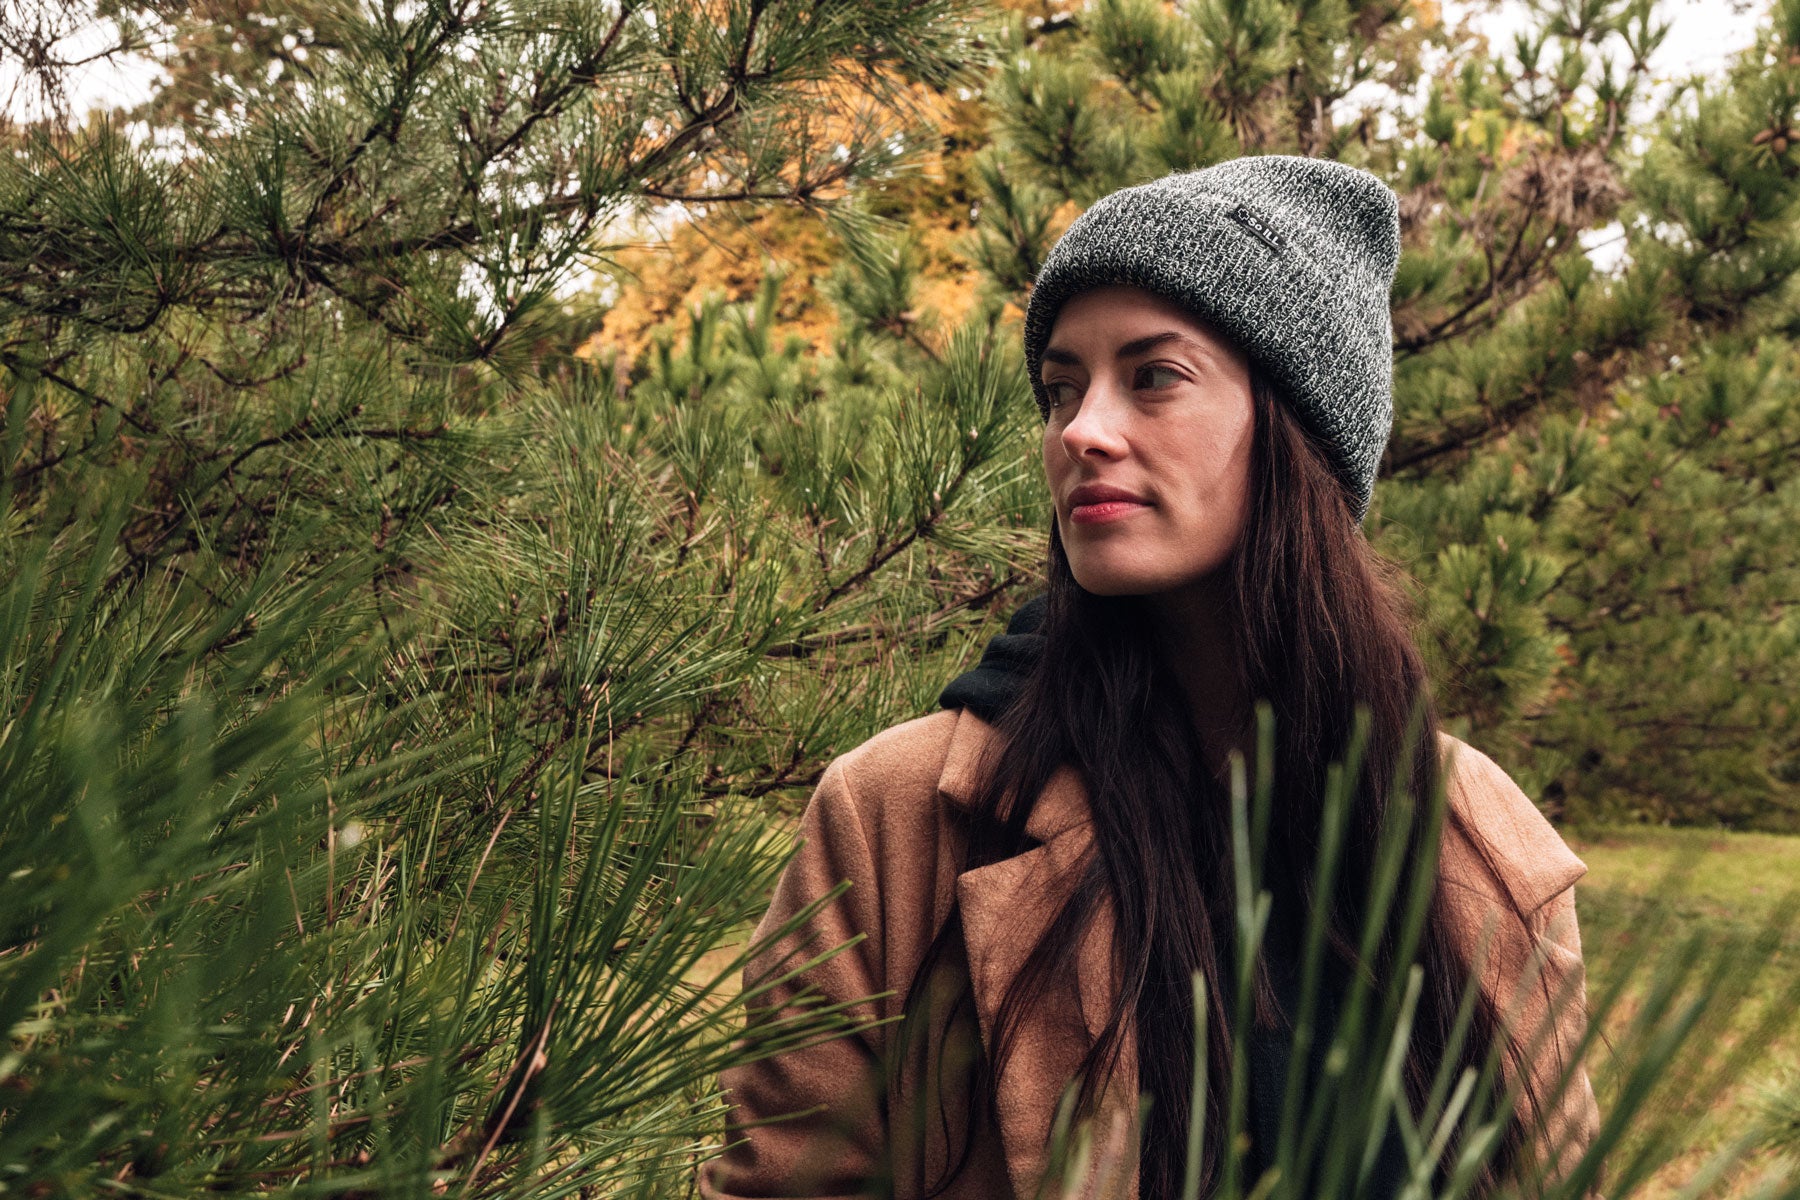 so ill heather beanie being worn by a woman in amidst some pine trees